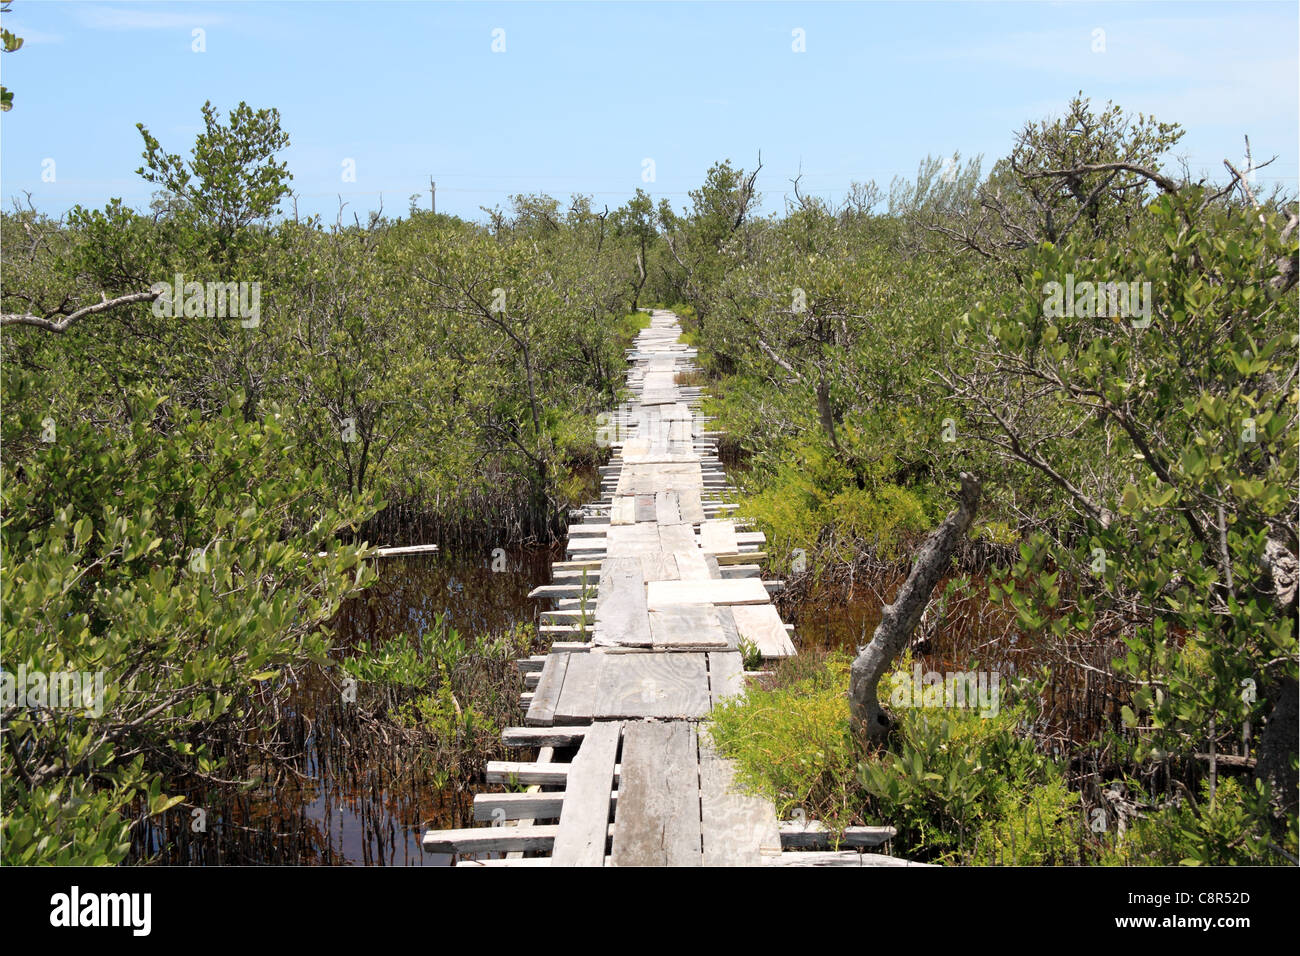 Boardwalk access to Marco Gonzales mayan ruins near San Pedro, Ambergris Caye, Barrier Reef, Belize, Caribbean, Central America Stock Photo